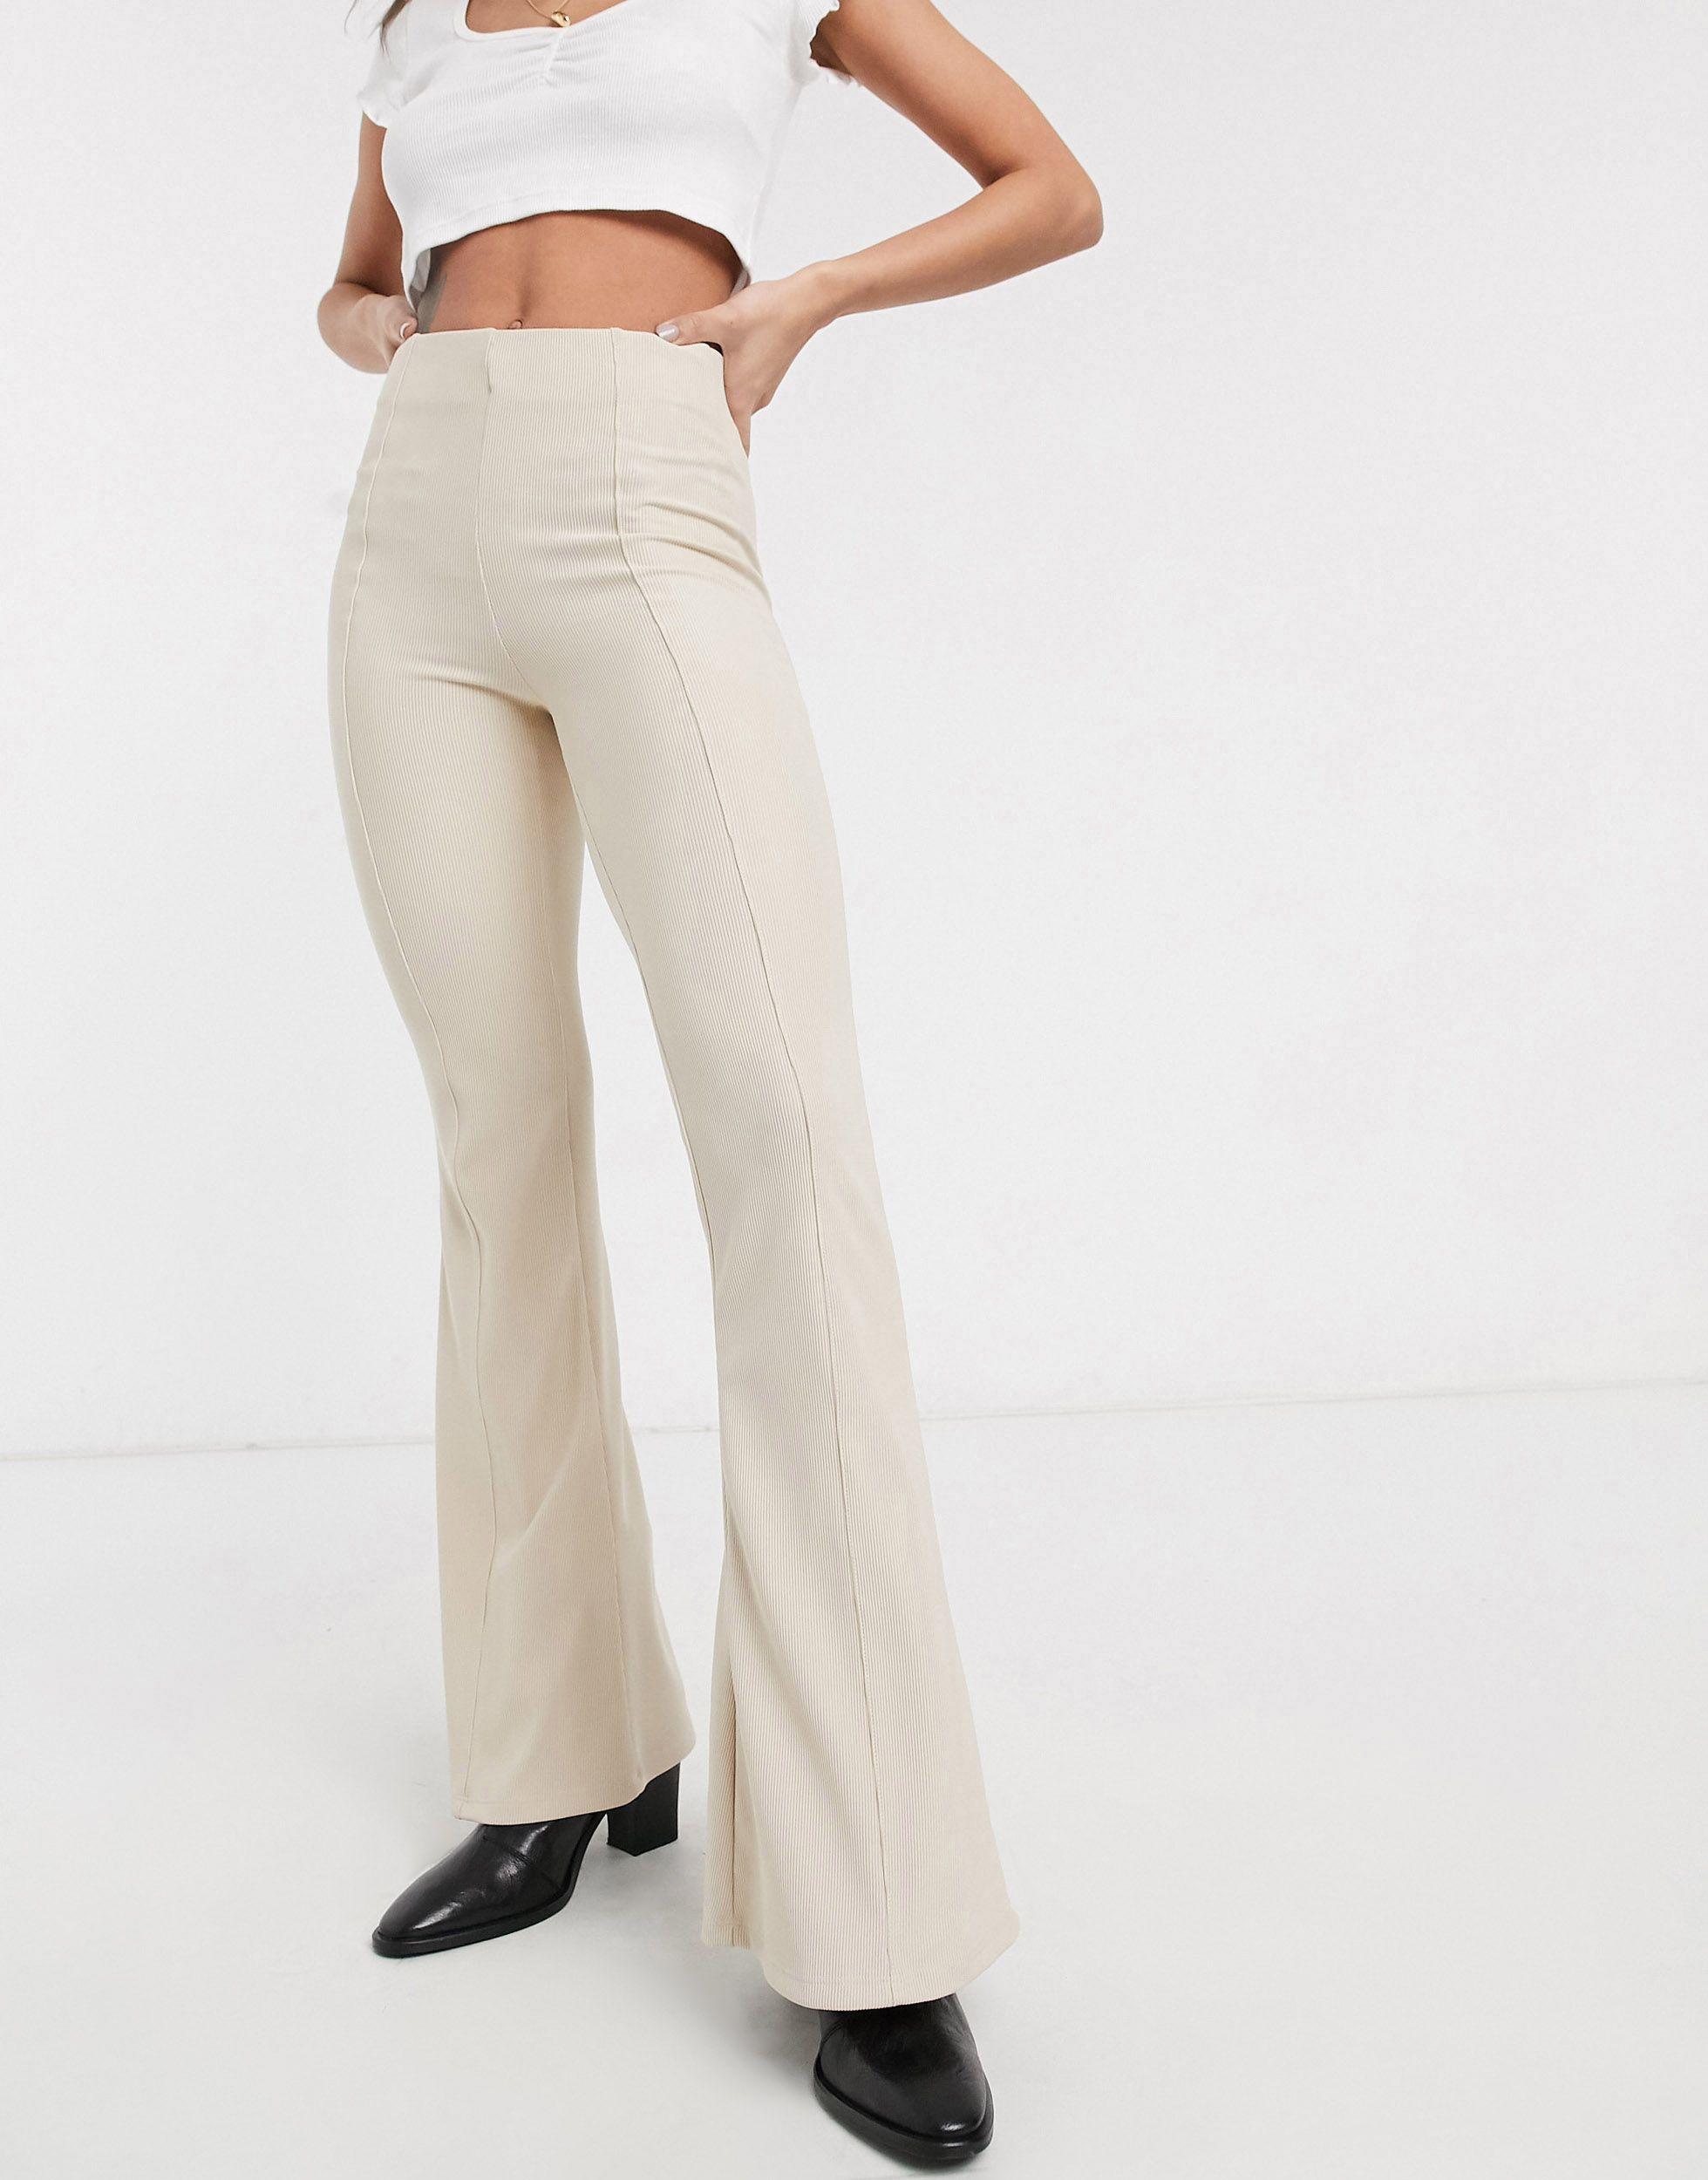 Bershka Flared Pants With Seam Detail in Natural | Lyst